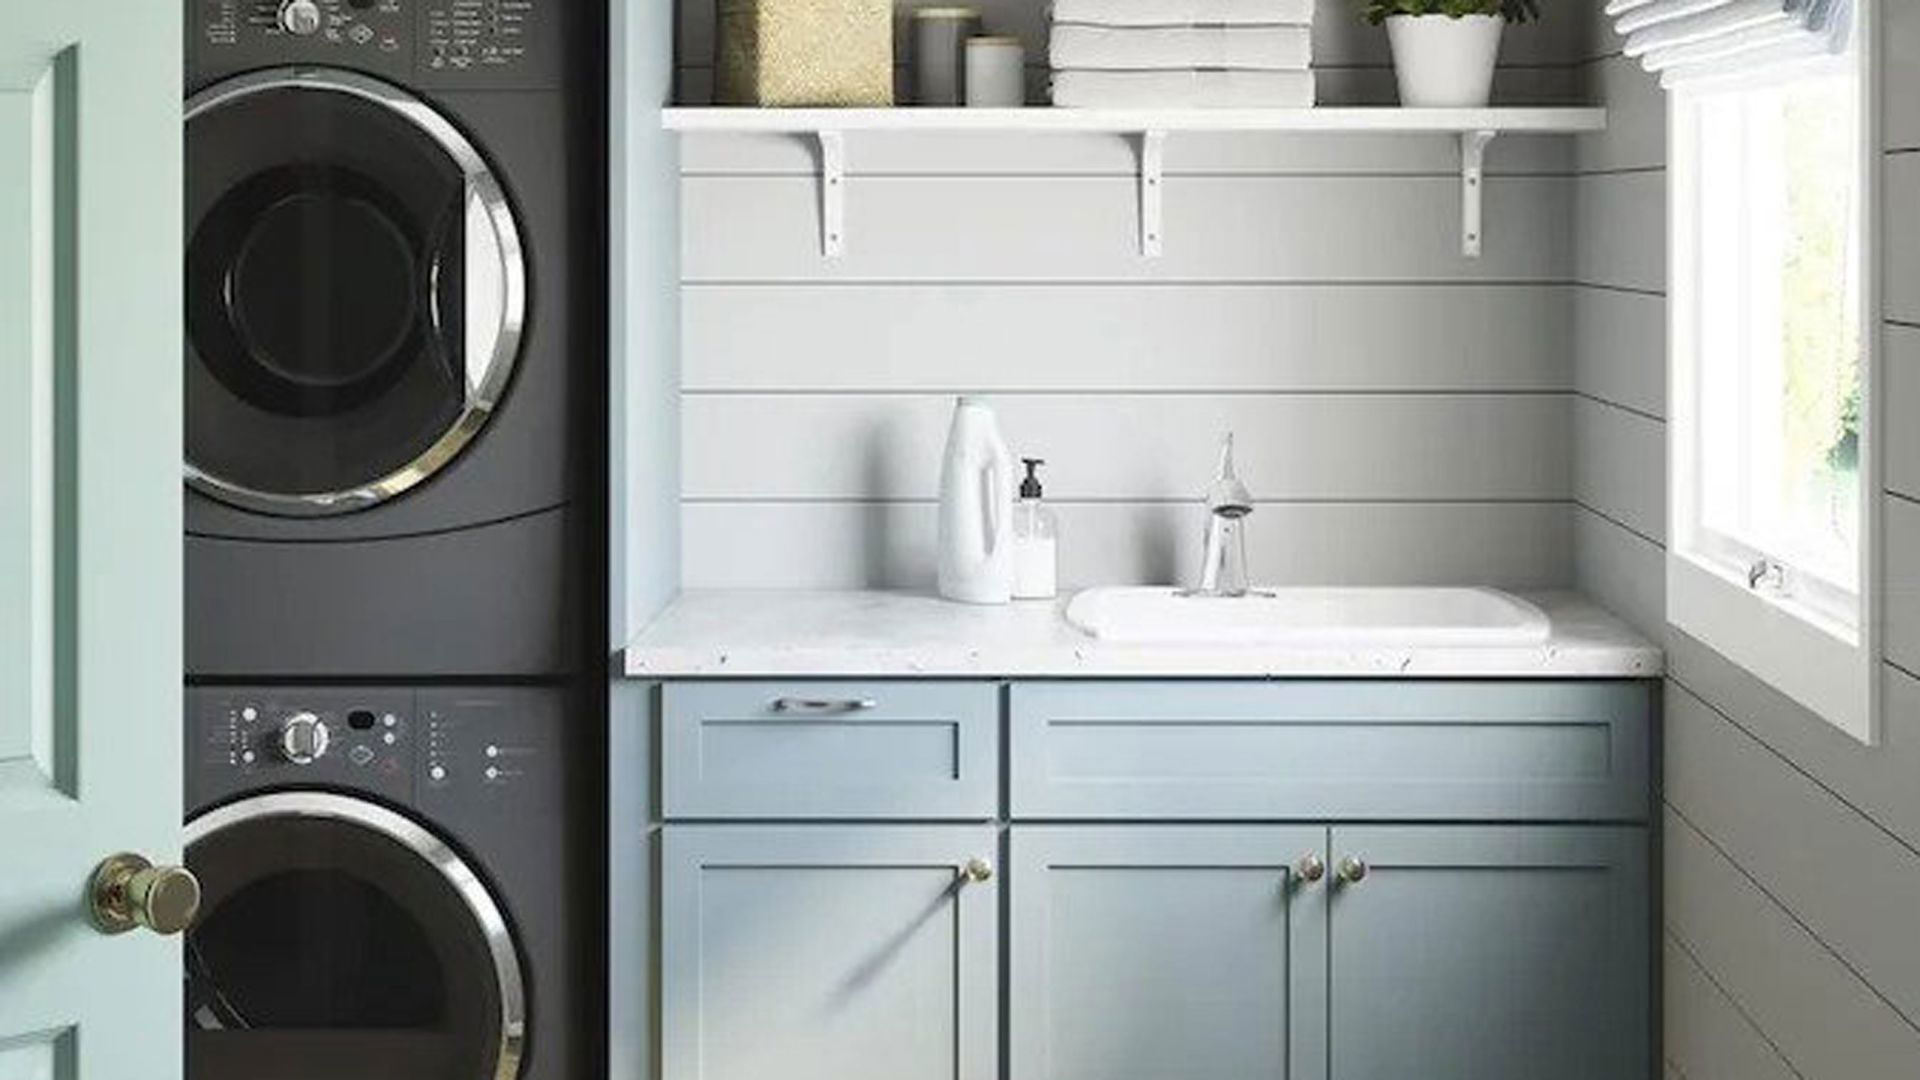 21 small laundry room ideas – tiny but mighty designs